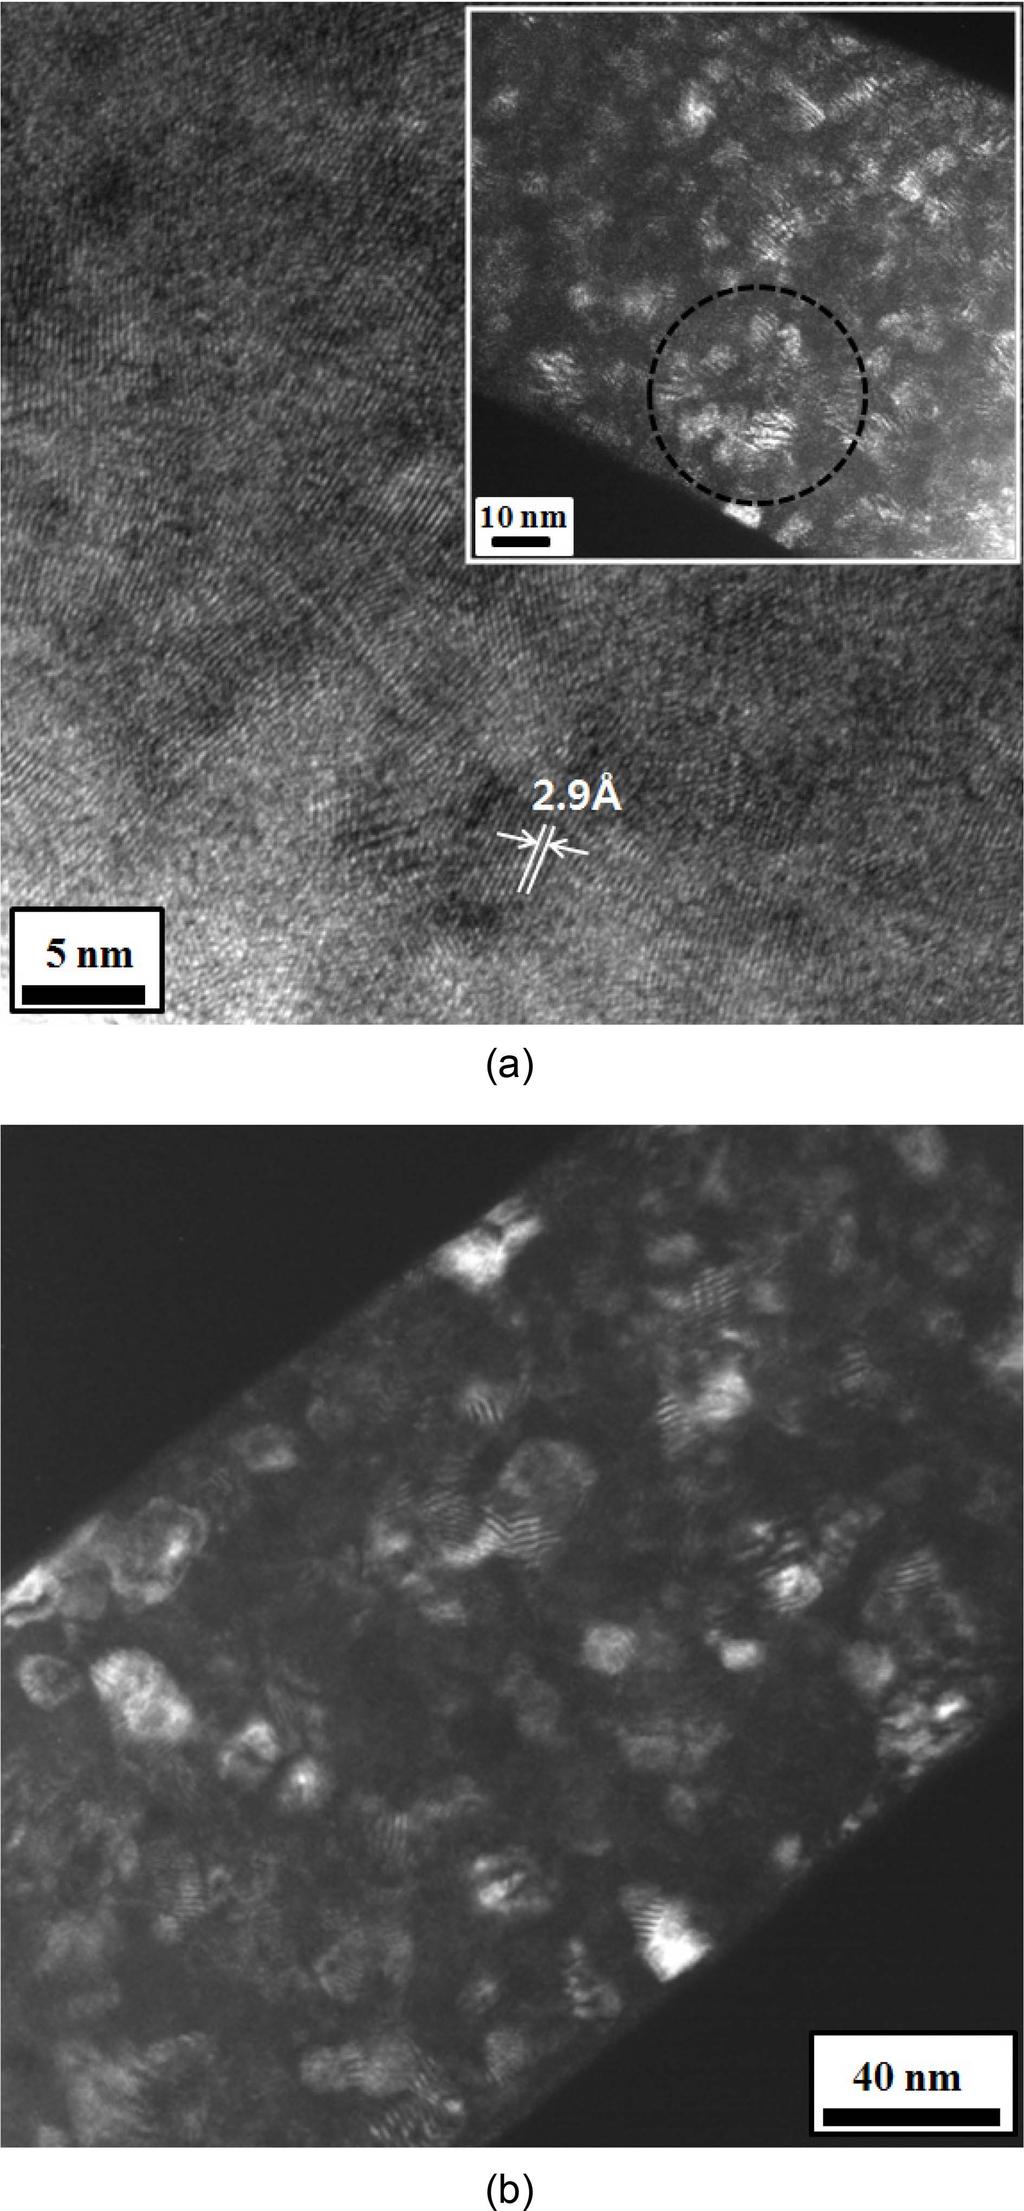 s p g g w» g ù Ÿ Ÿ 349 Fig. 8. TEM high reslutin and dark field images f zircnia nanfibers heat-treated at (a) 400 C and (b) 600 C. The inset in (a) represents a dark field image. ƒ 400 C, ù z y x s.